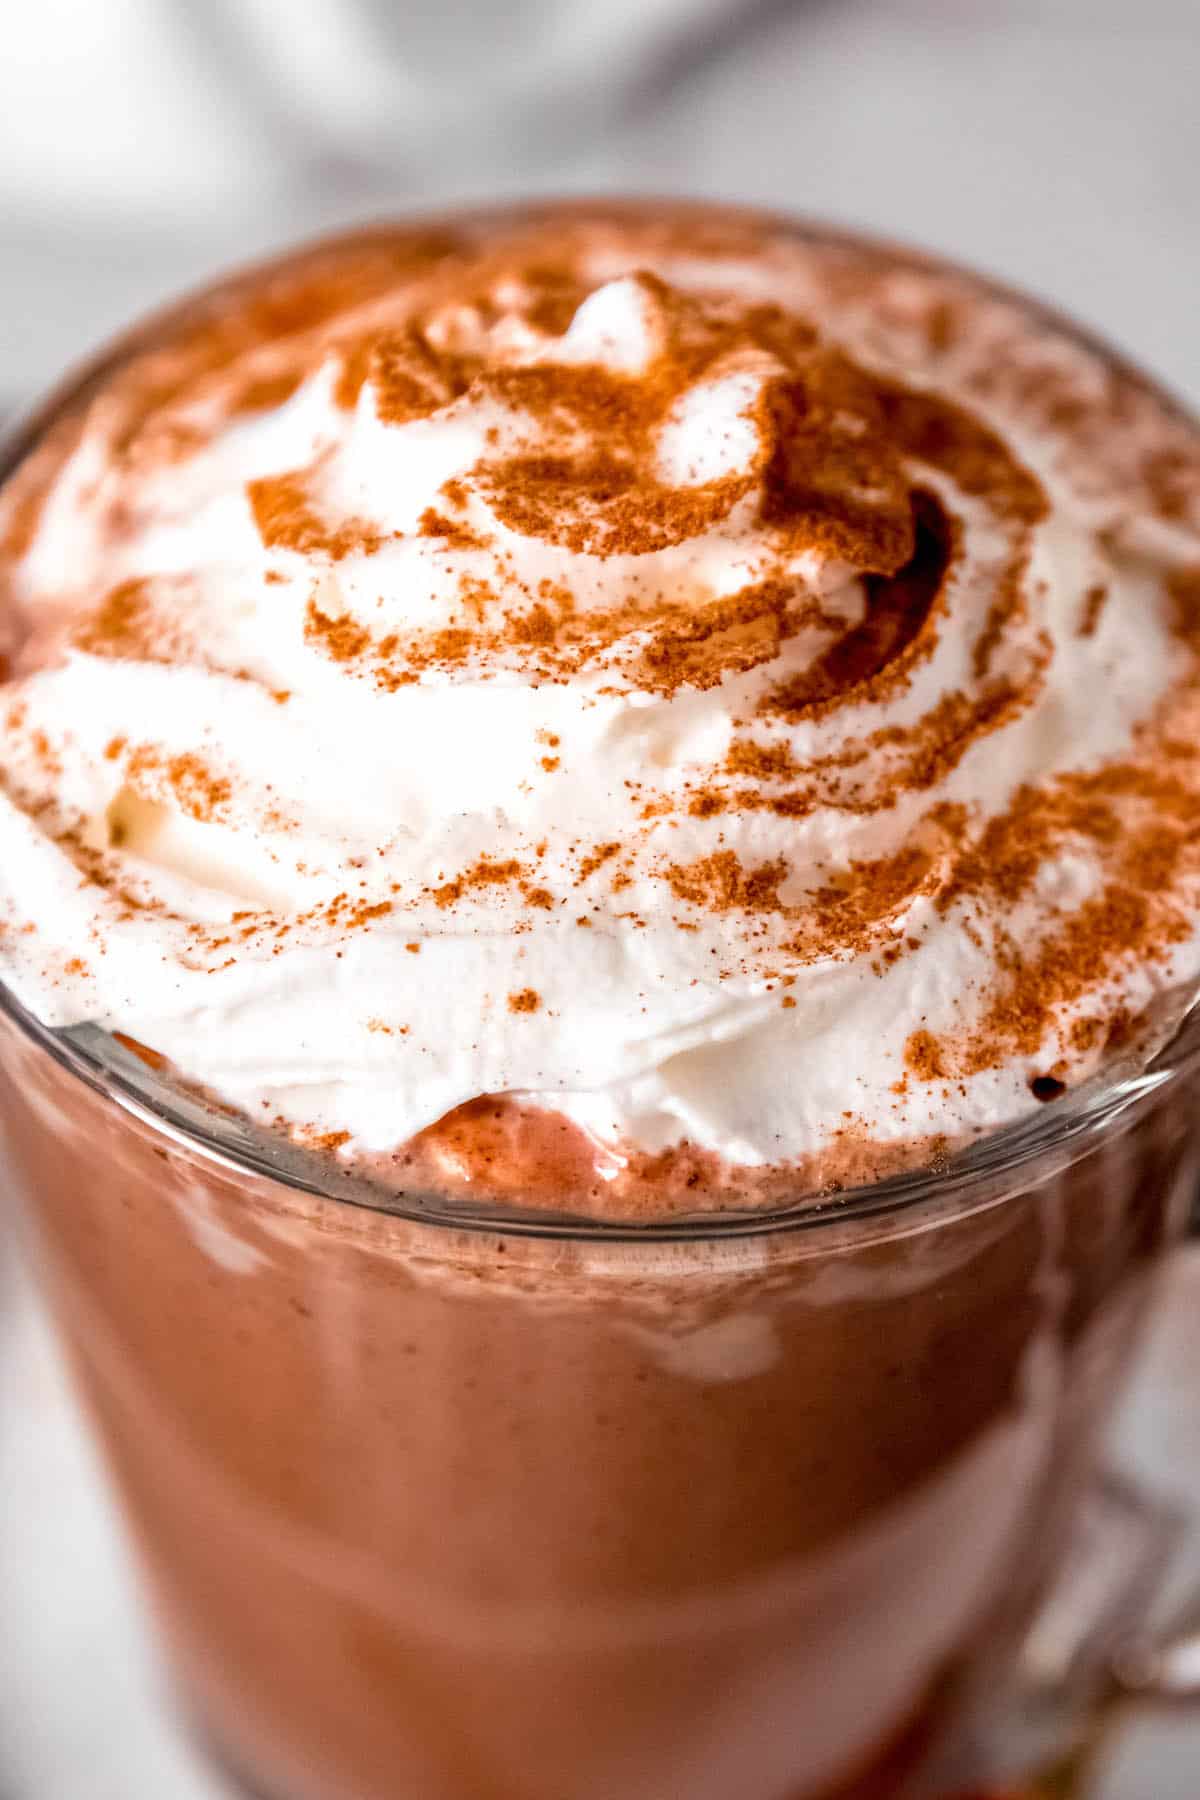 hyper closeup shot of a spicy Mexican mocha topped with whipped cream, cinnamon, and chili powder.